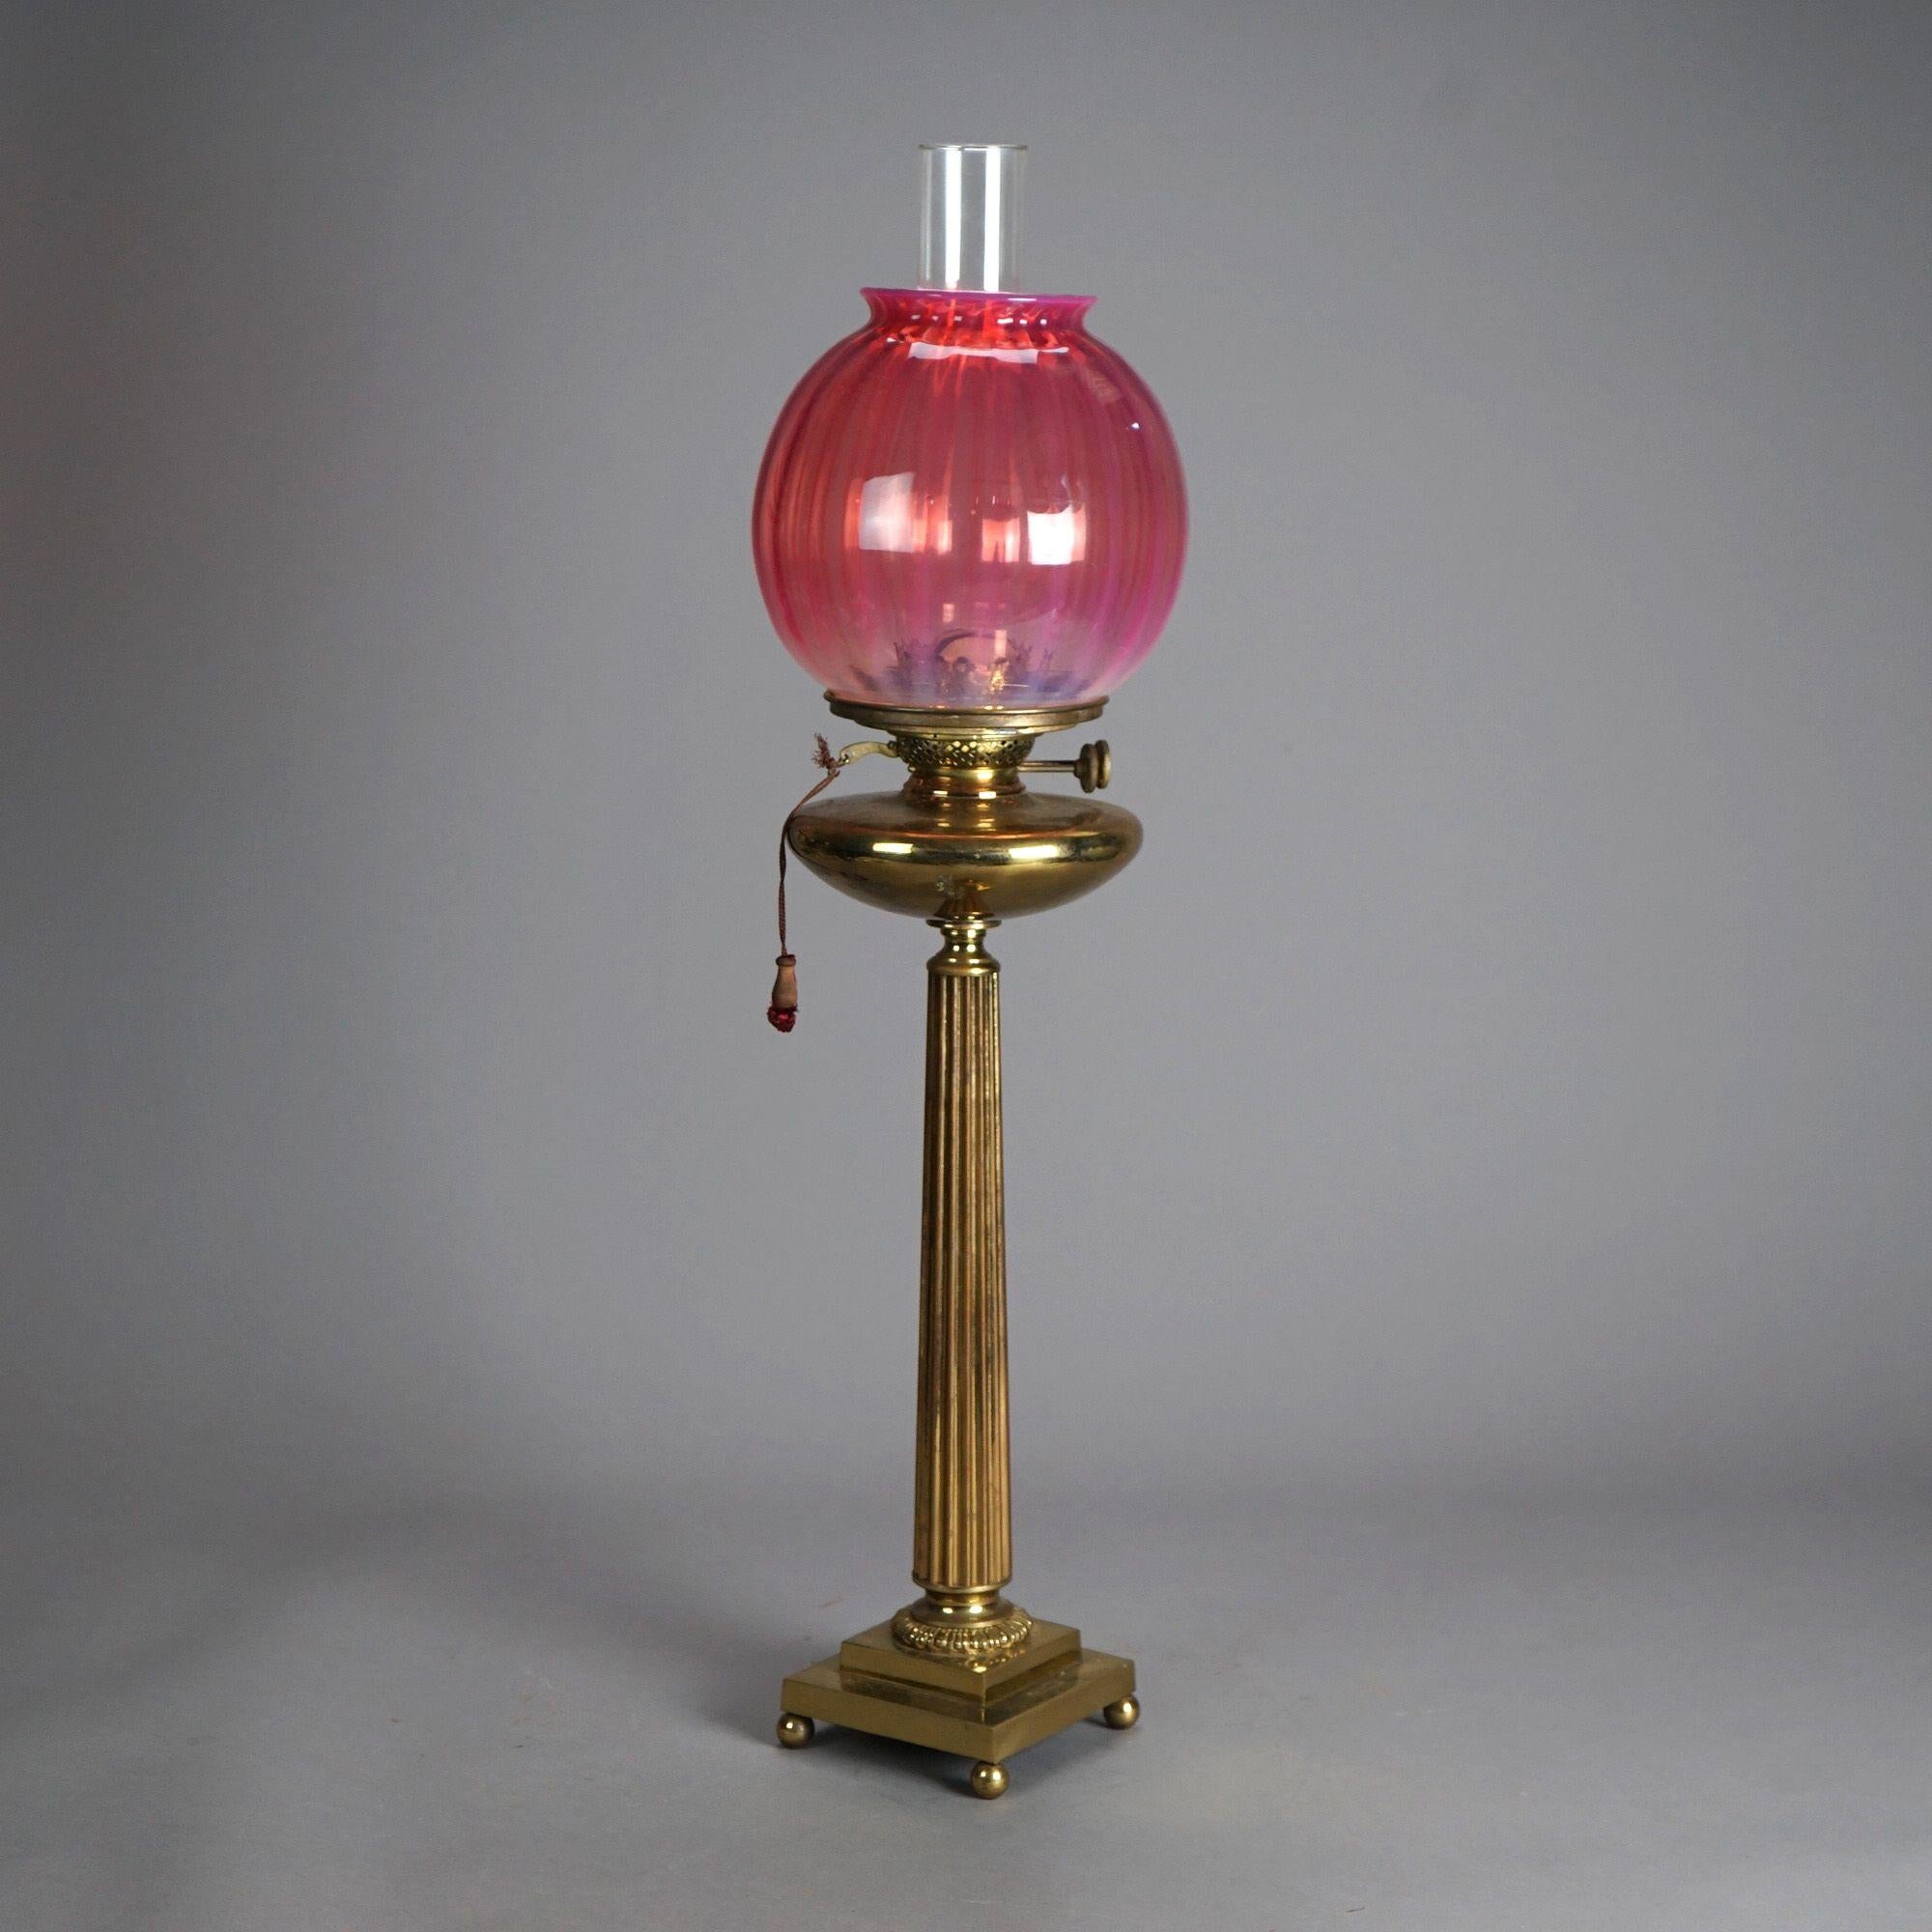 Cast Antique Classical Brass Oil Parlor Lamp & Cranberry Glass Ribbed Shade c1880